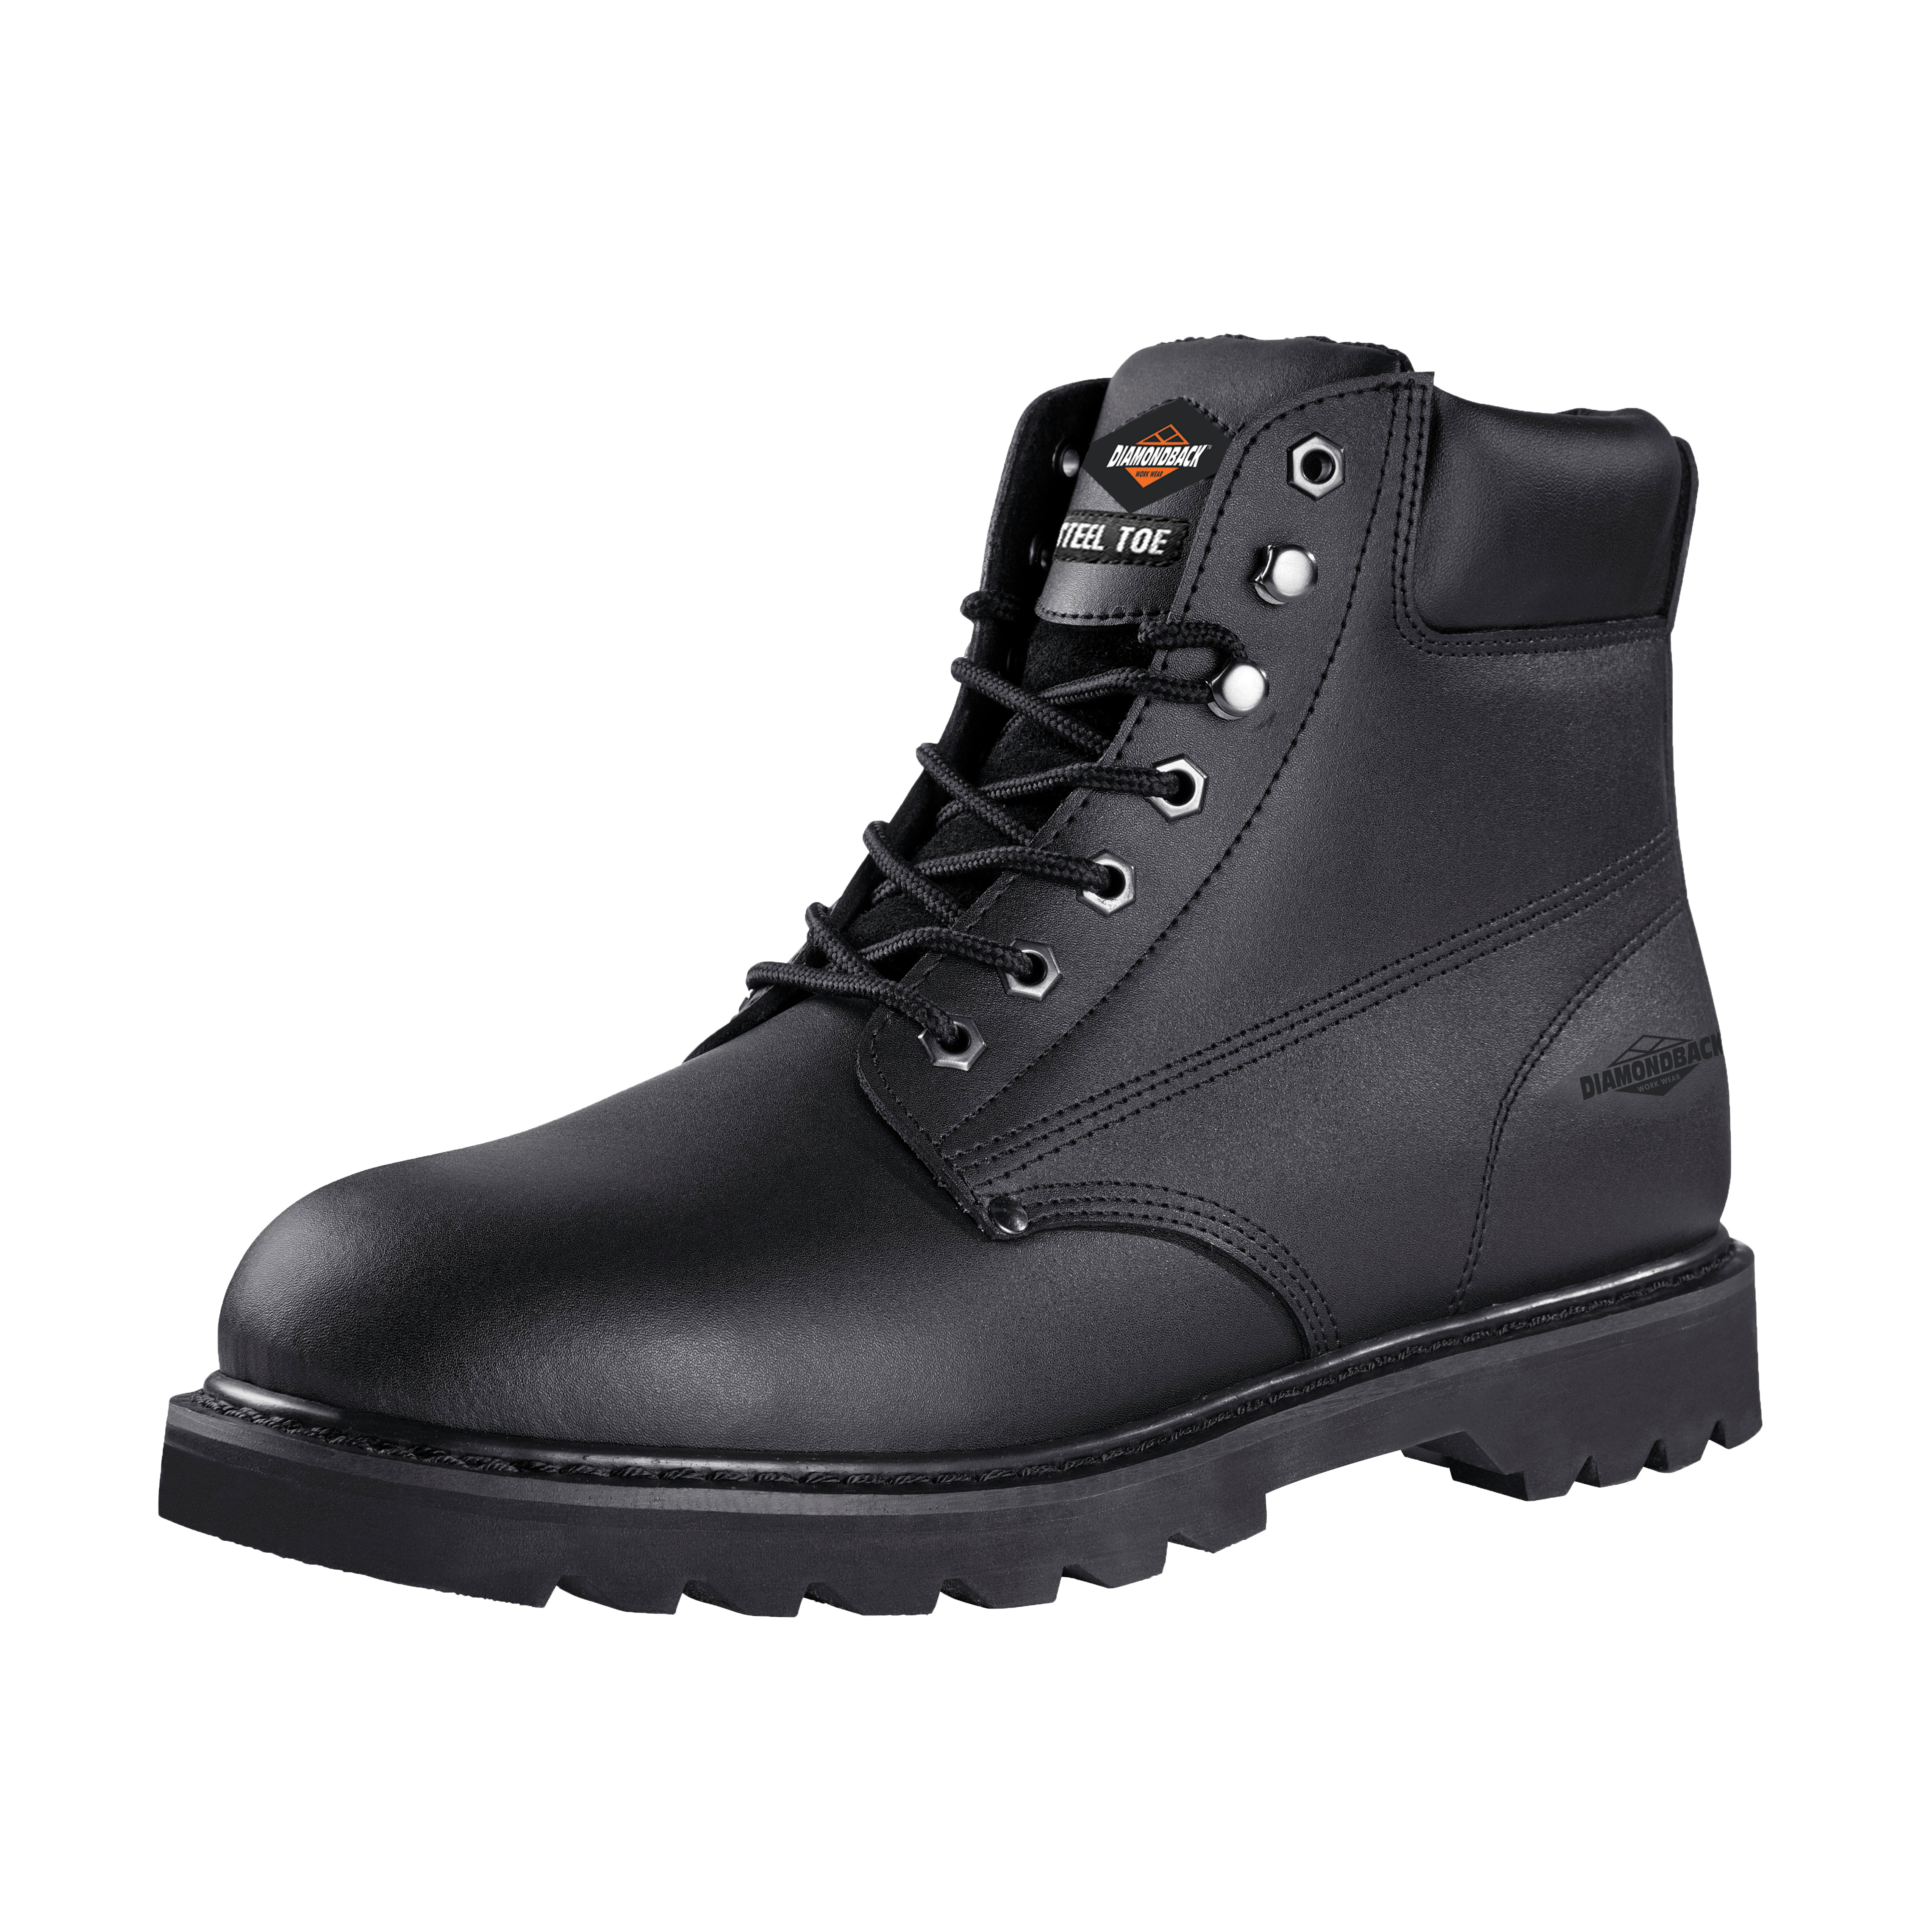 655SS-10 Work Boots, 10, Medium Shoe Last W, Black, Leather Upper, Lace-Up Boots Closure, With Lining